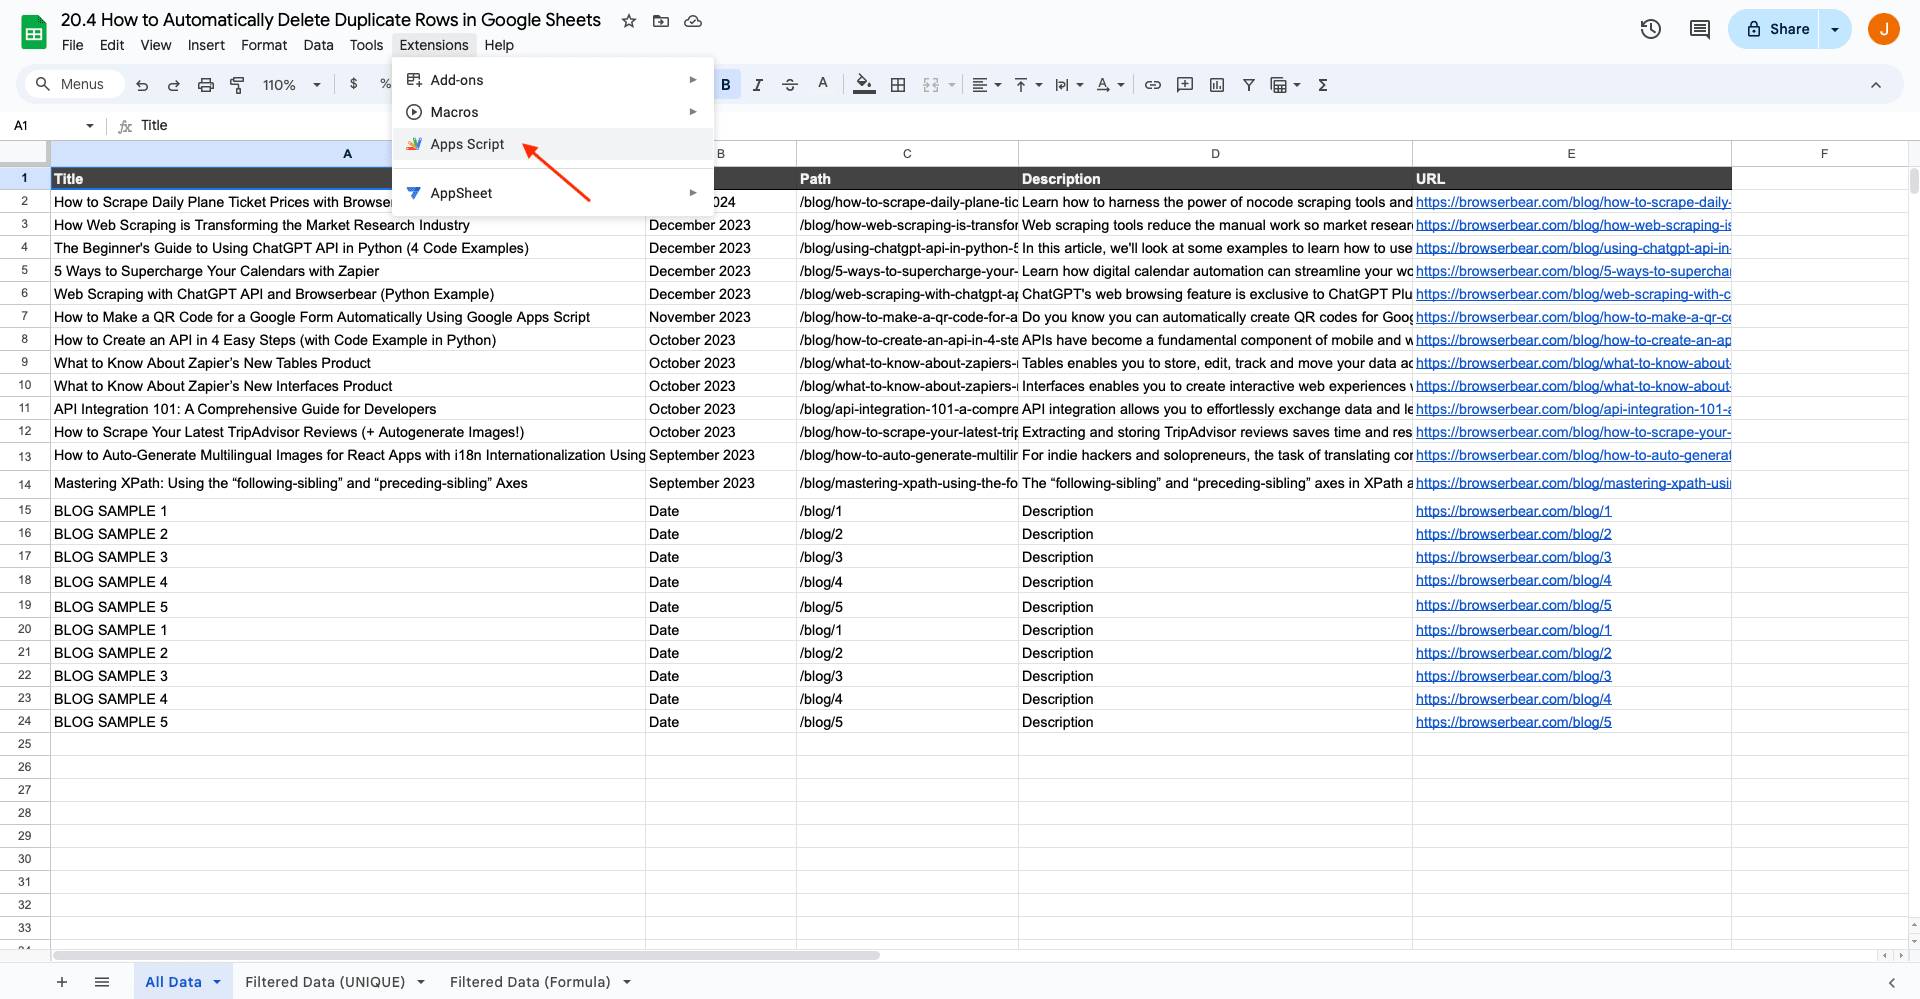 Screenshot of Google Sheets spreadsheet with red arrow pointing to Apps Script extension